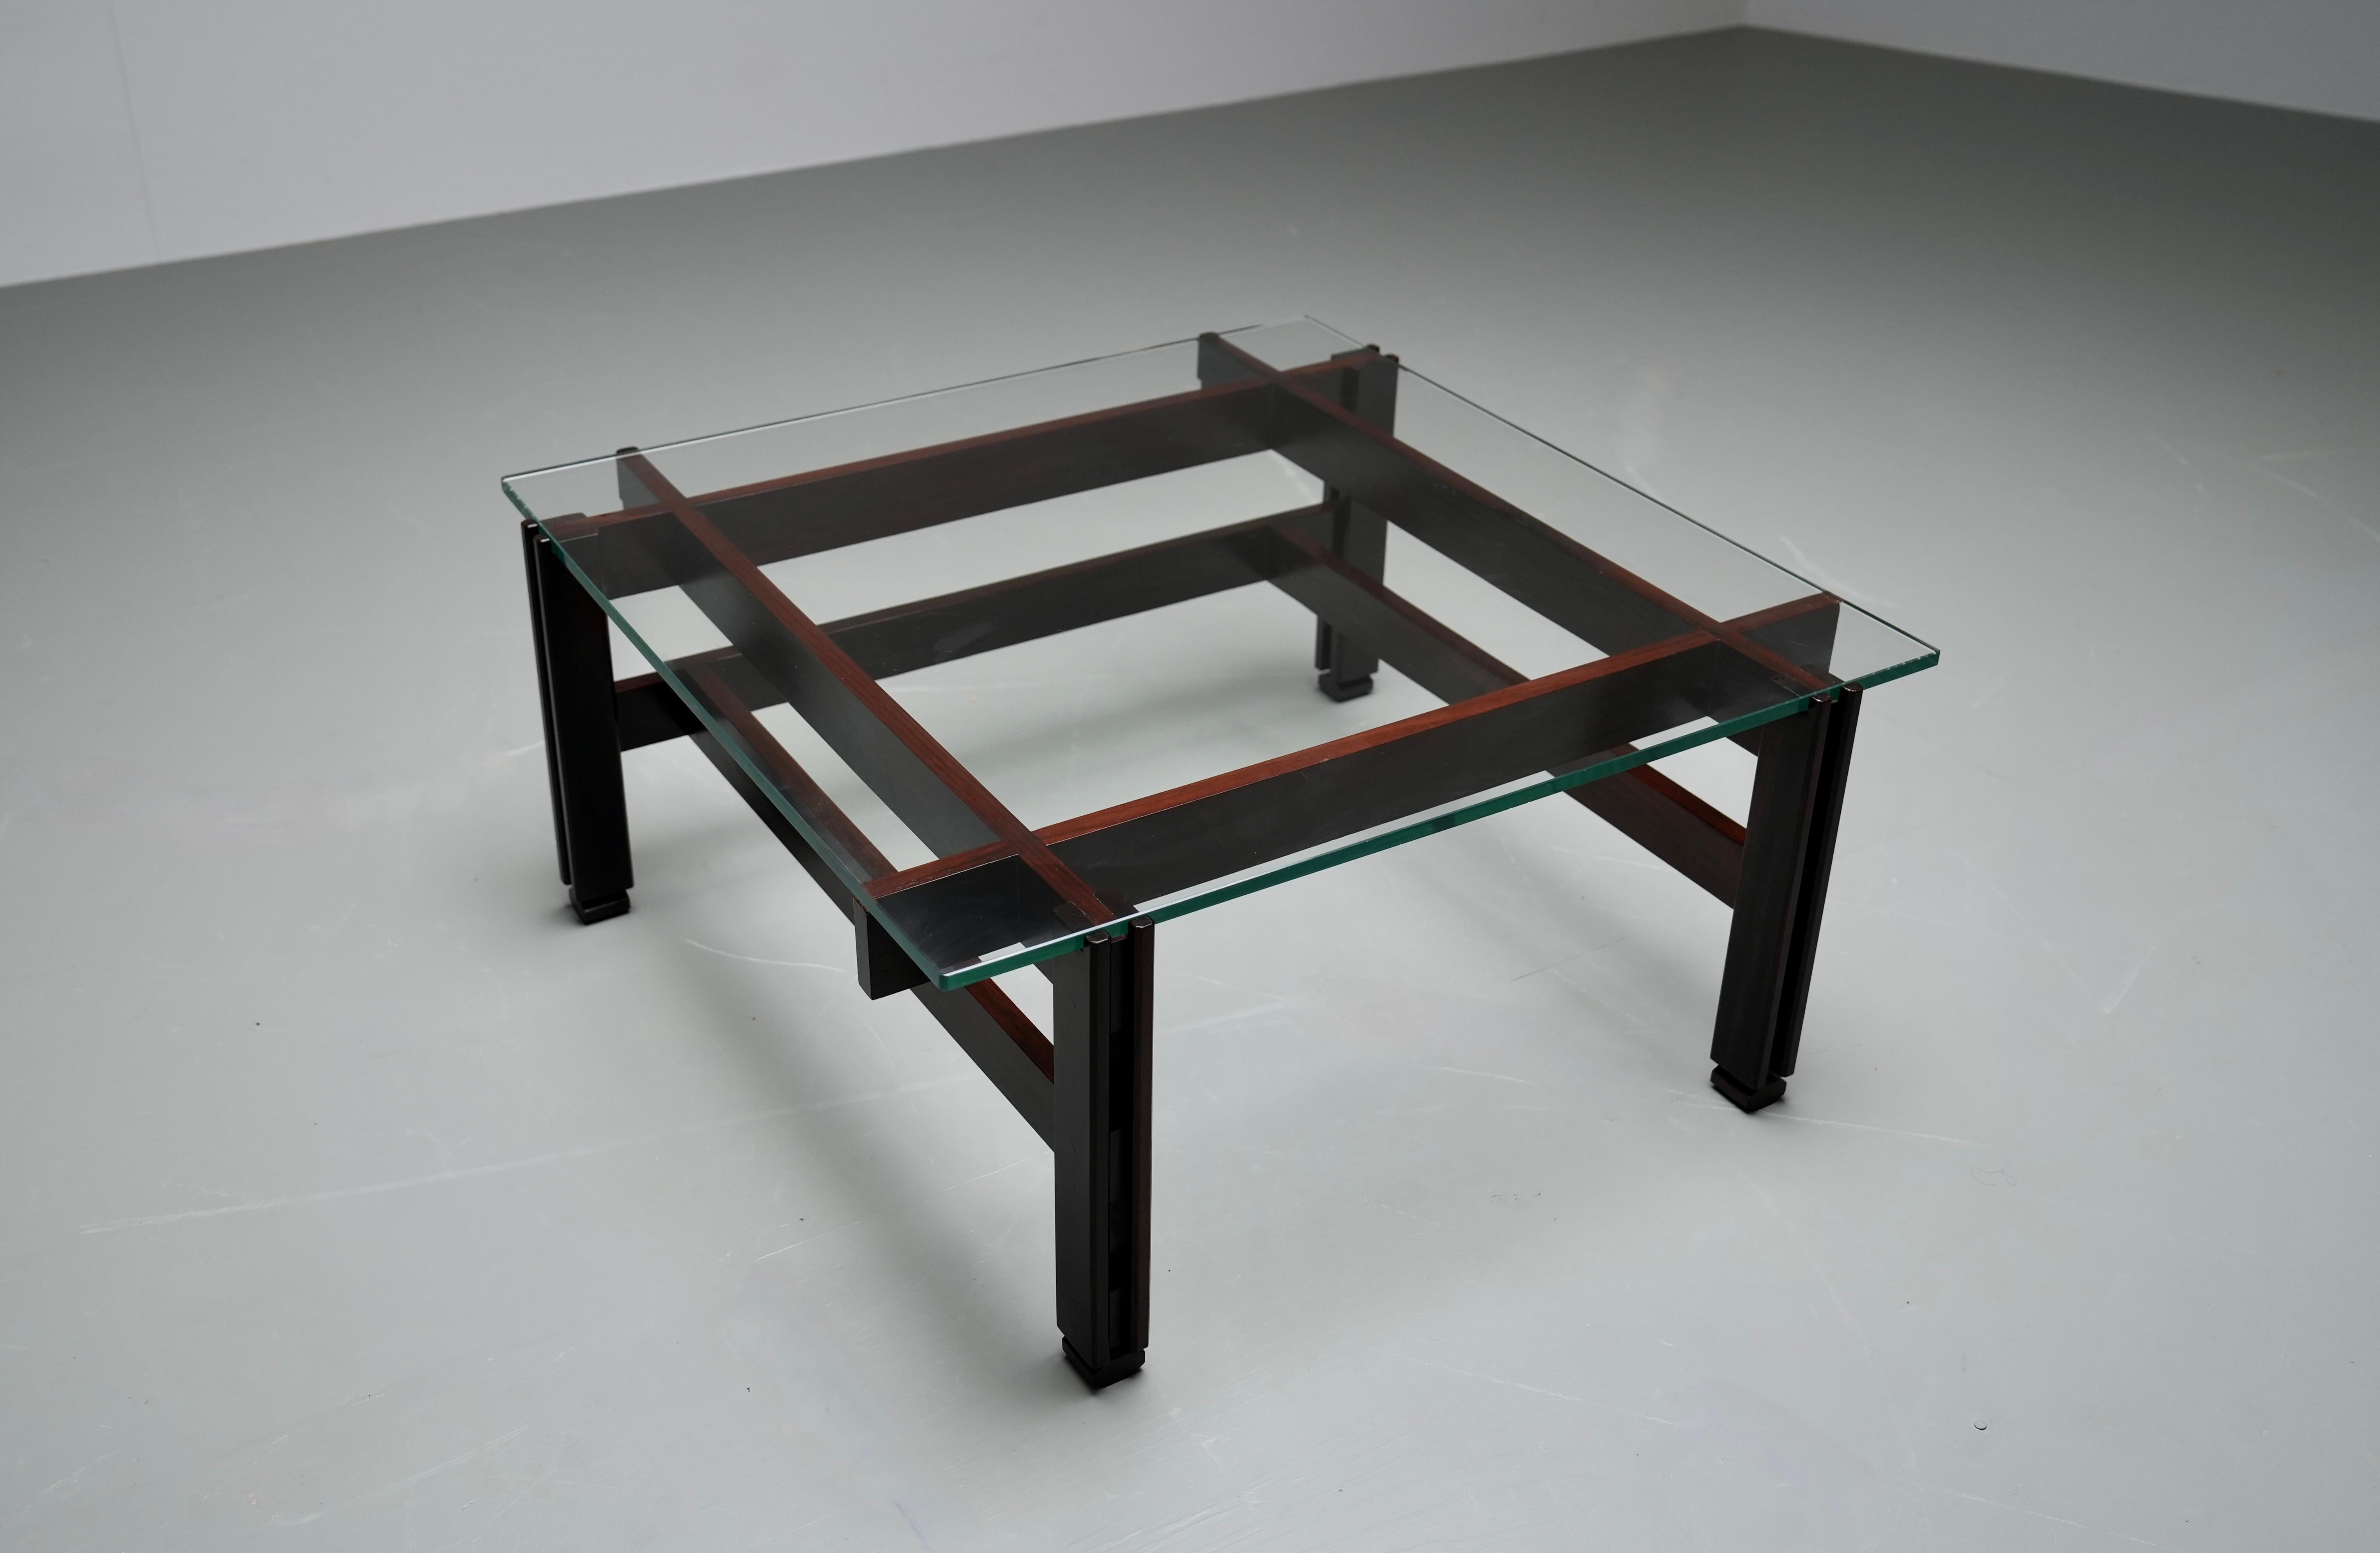 Famous coffeetable by Italian architect Ico Parisi, designed in 1962 for Cassina. You see a lot of rectangular ones but this one, a square one, is much more rare. The most eye-catching of this table is the asymmetrical design of the base and the